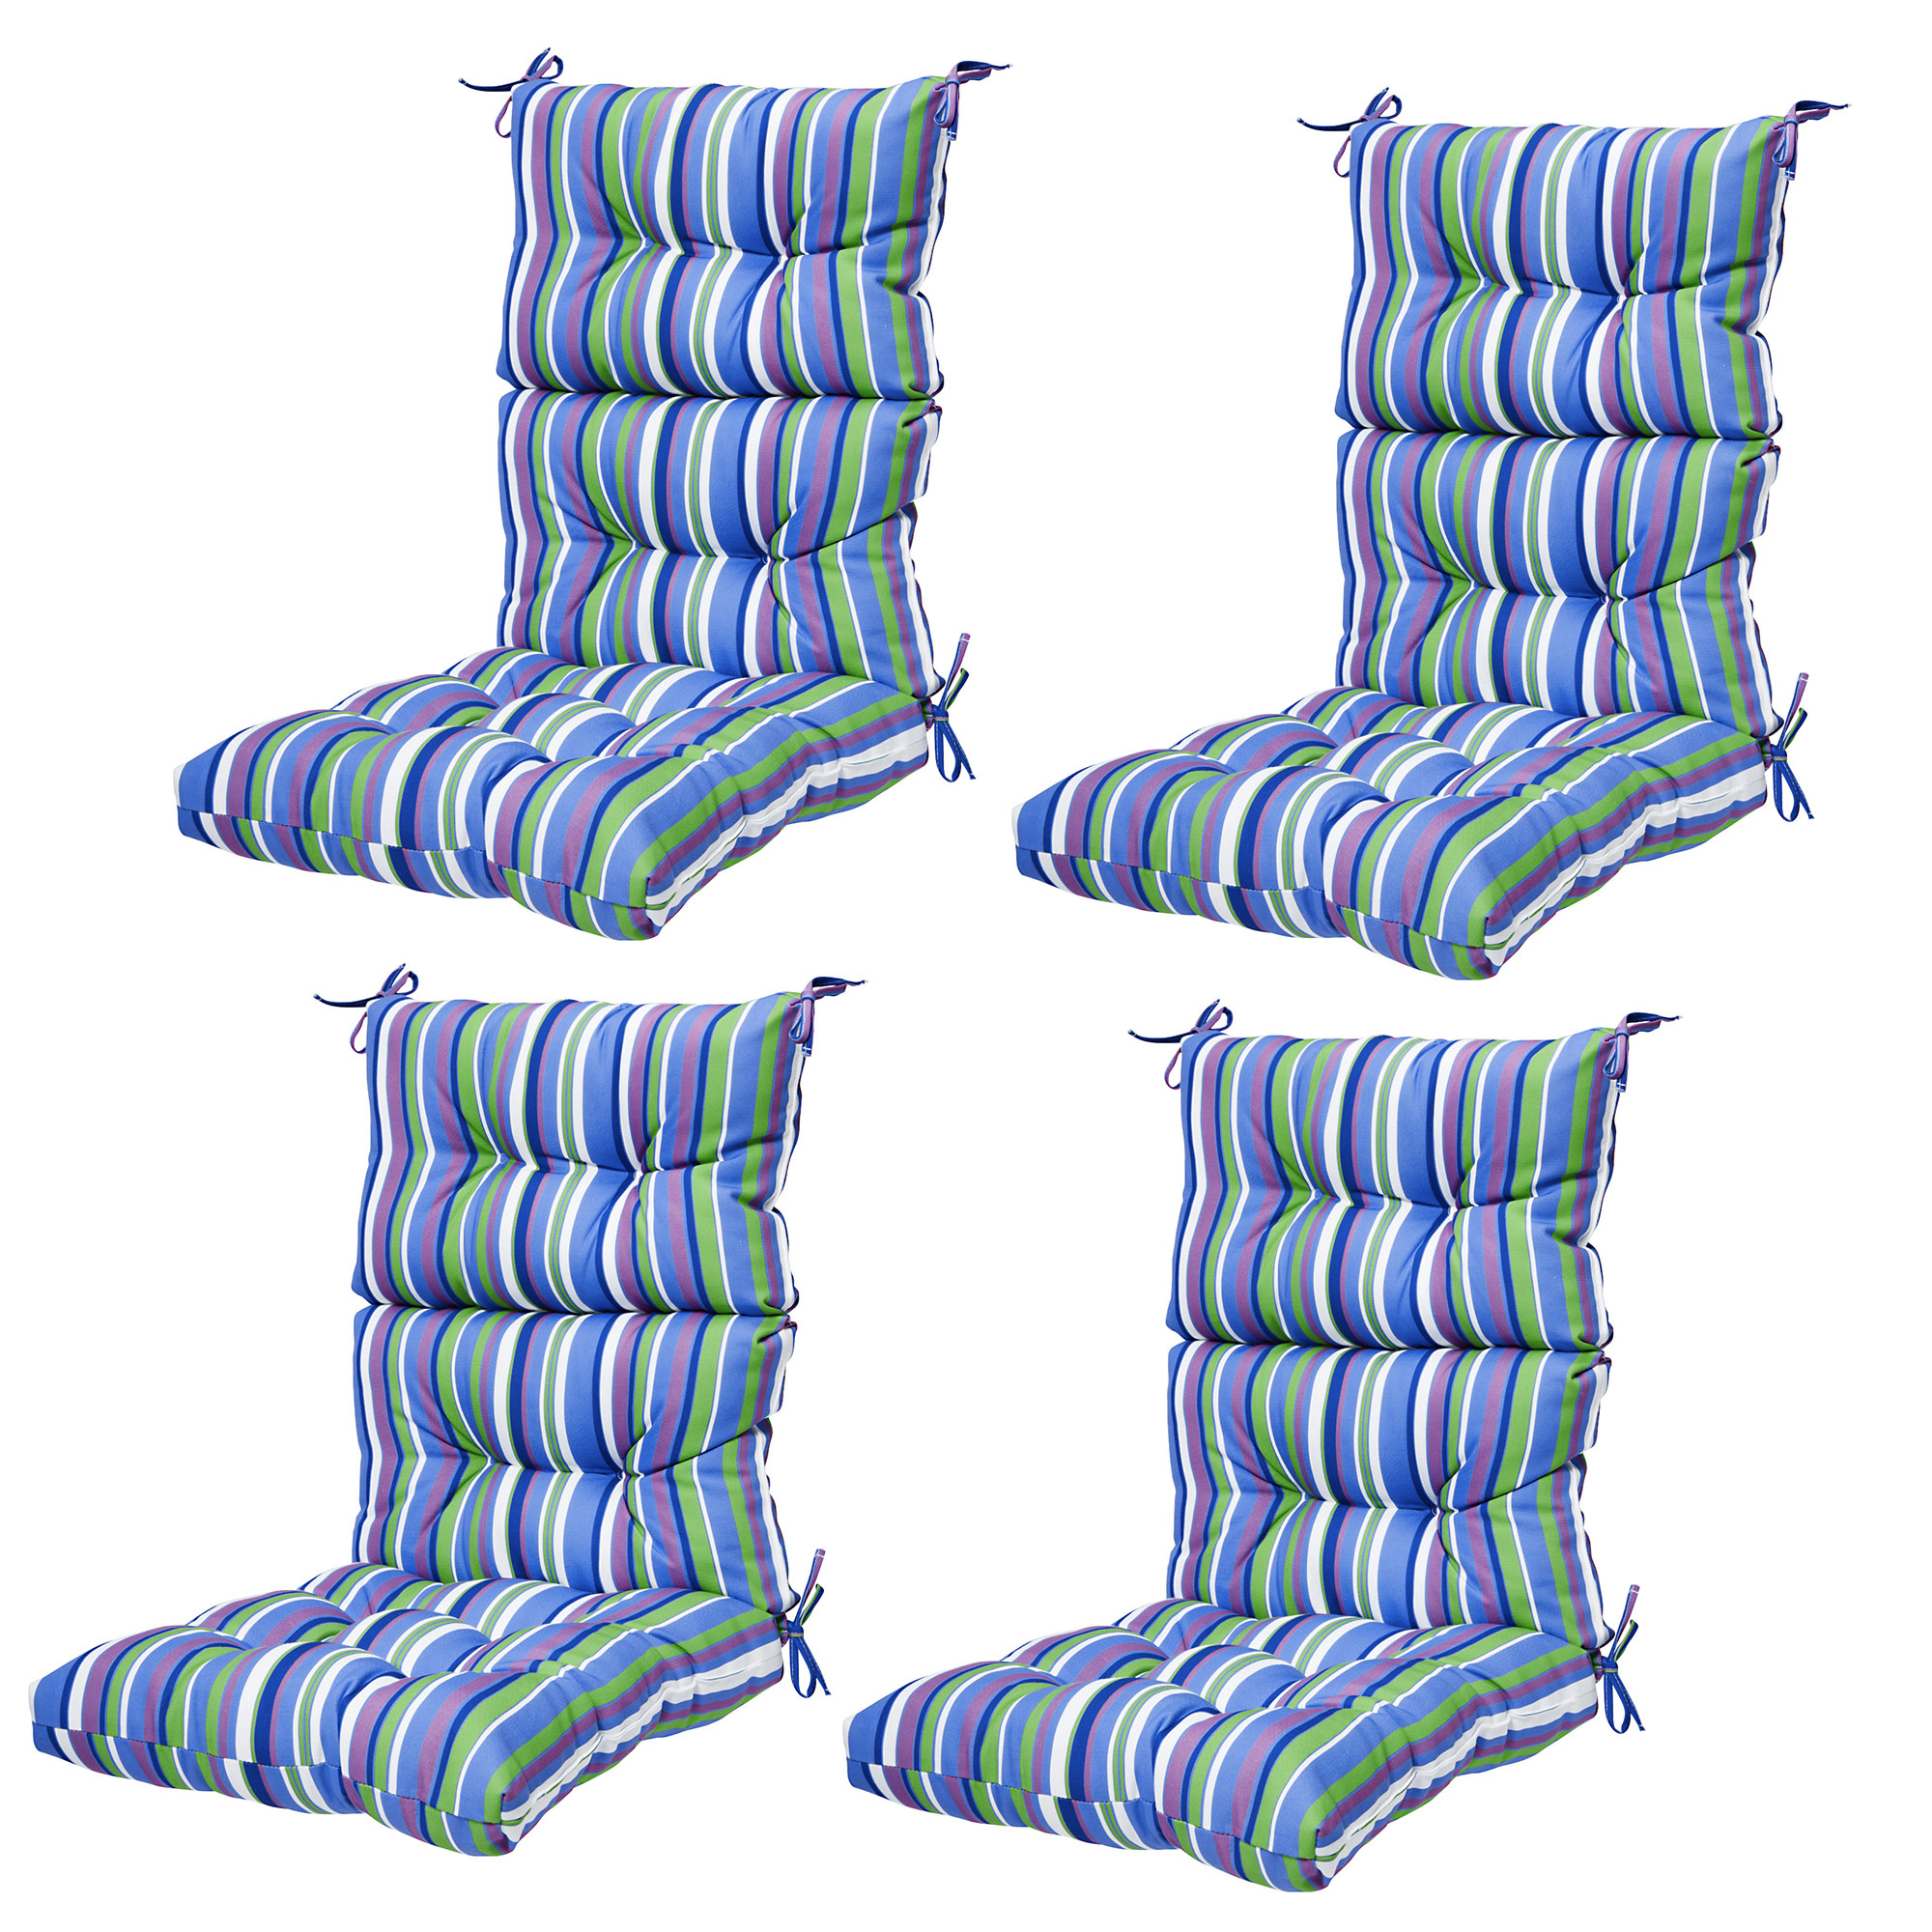 LELINTA 4 Pcs 44Inch Patio Chaise Lounger Cushion for Rocking Chair, Indoor/Outdoor Lounger Cushions Rocking Chair Pads Sofa Cushion - Thick Padded Seat Cushion Swing Seat Sets Cushion s with Ties - image 1 of 7